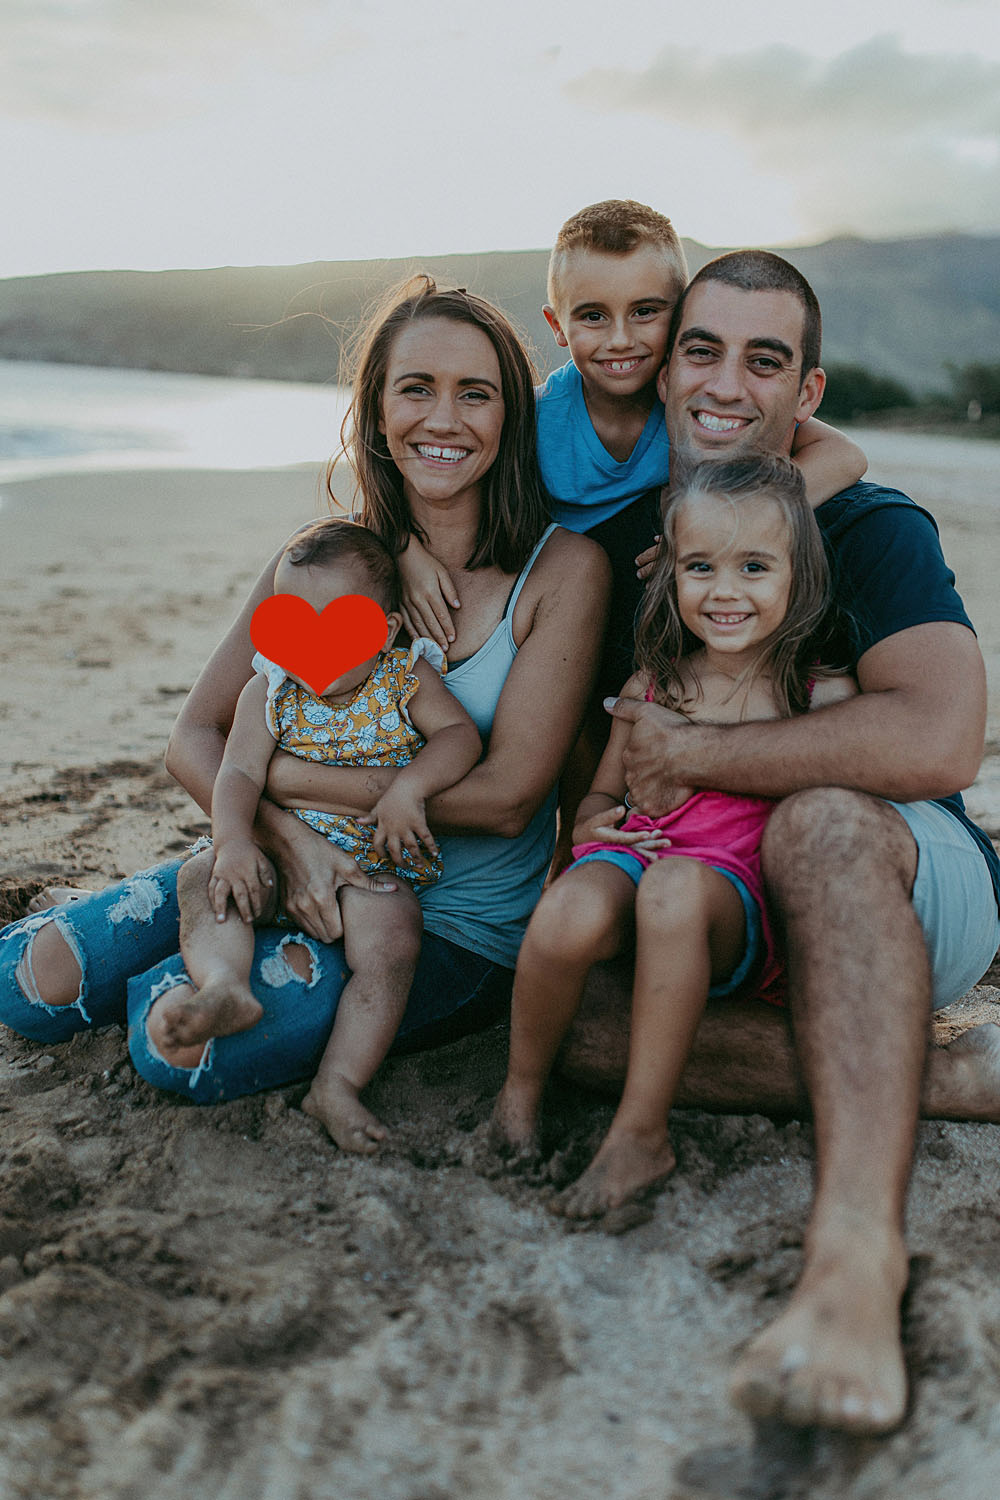 Hawaii Foster Care shares about their family in Maui, Hawaii. 